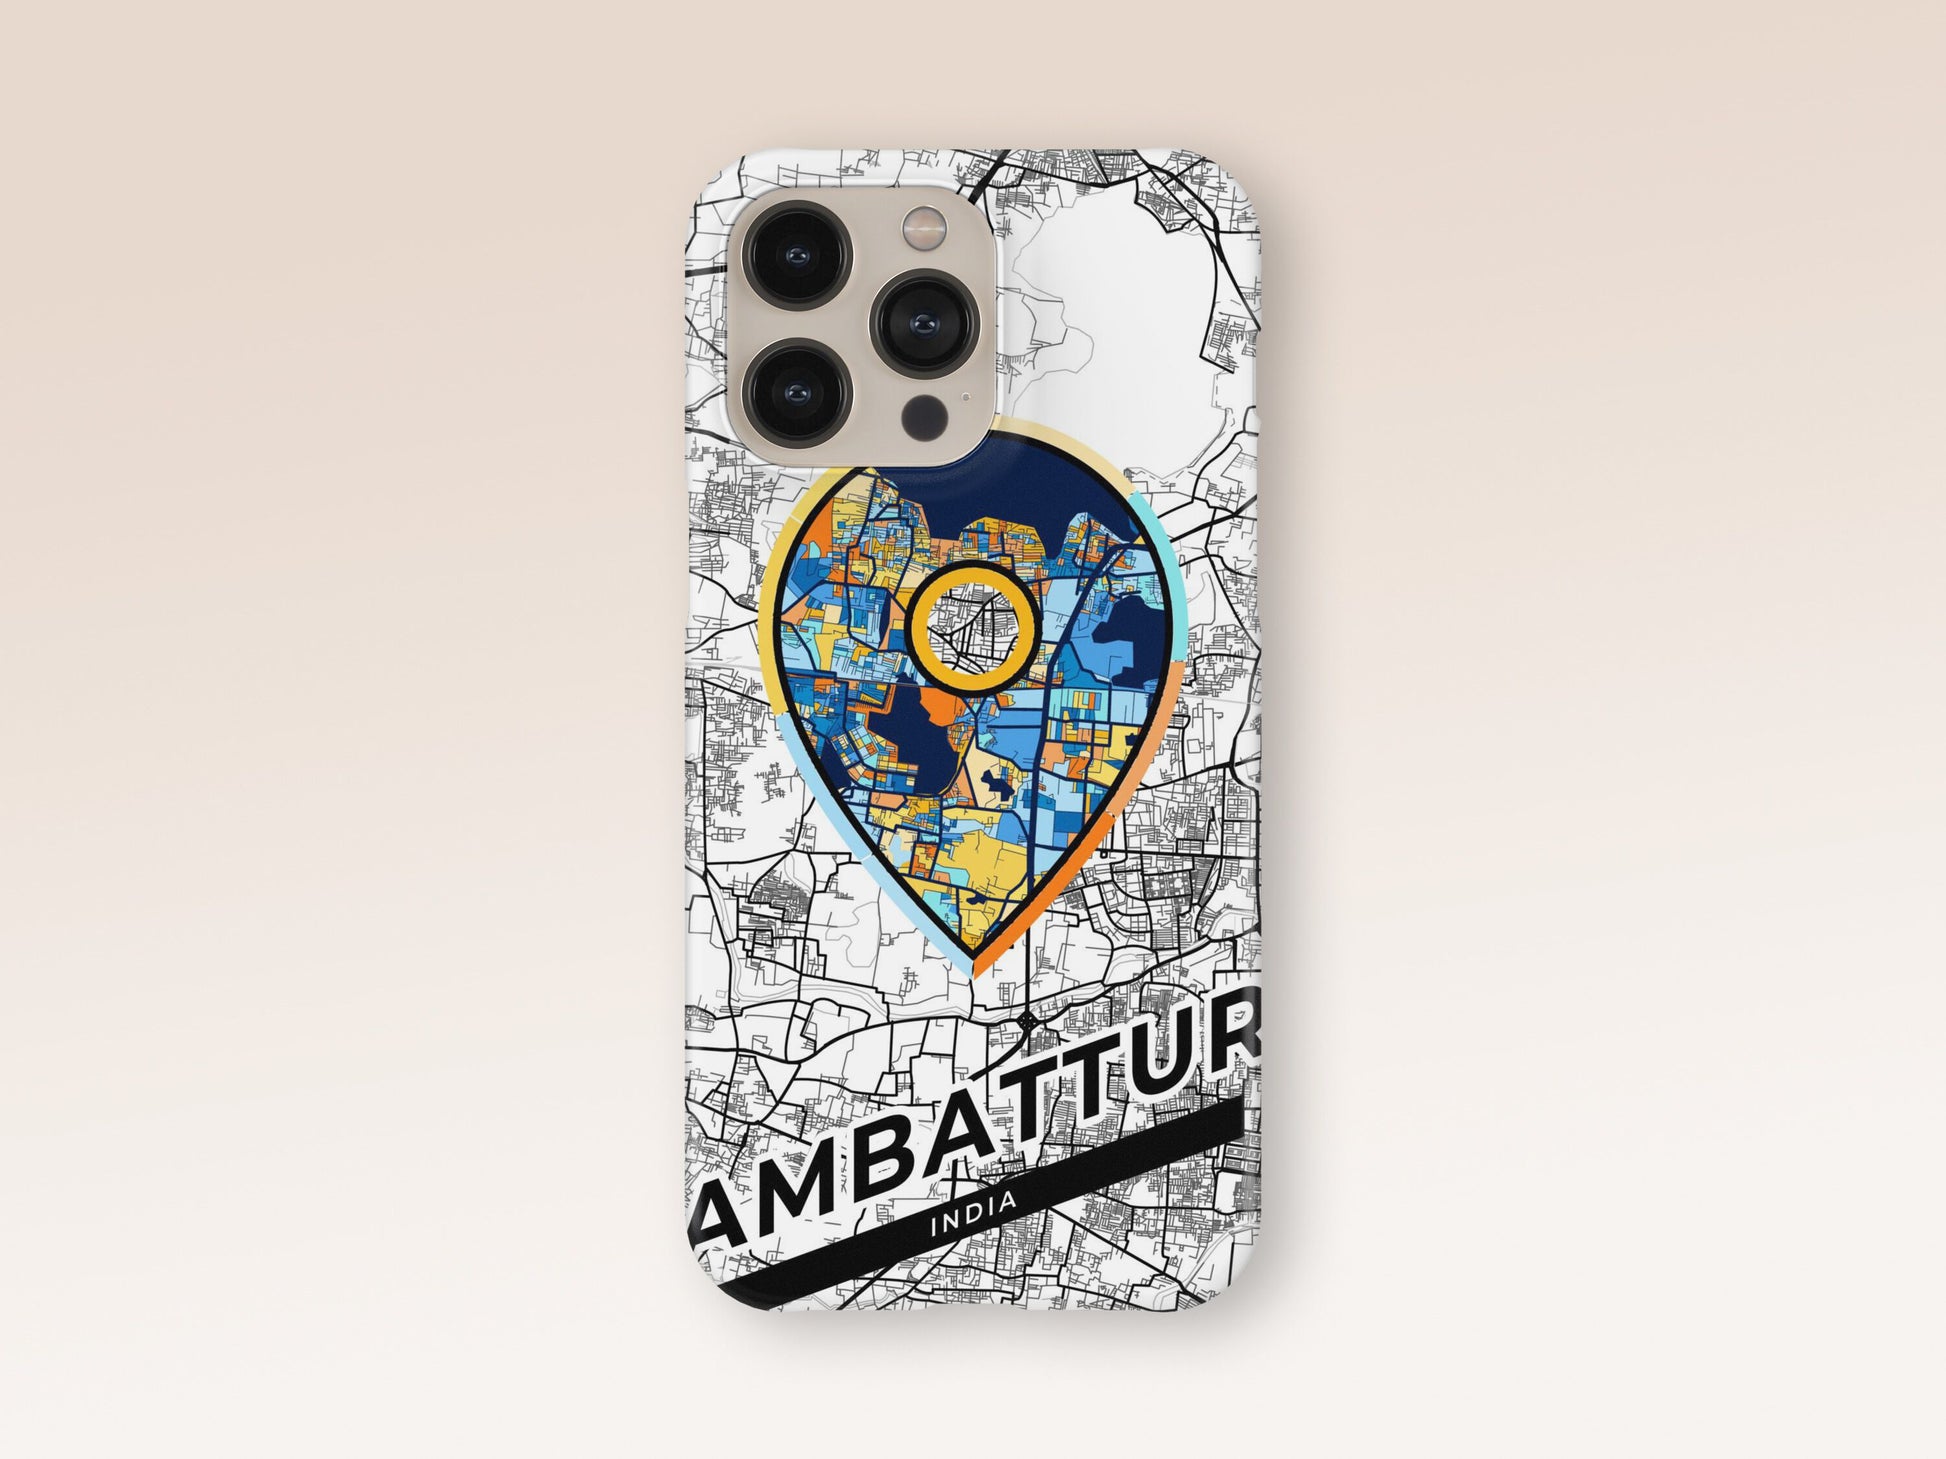 Ambattur India slim phone case with colorful icon. Birthday, wedding or housewarming gift. Couple match cases. 1